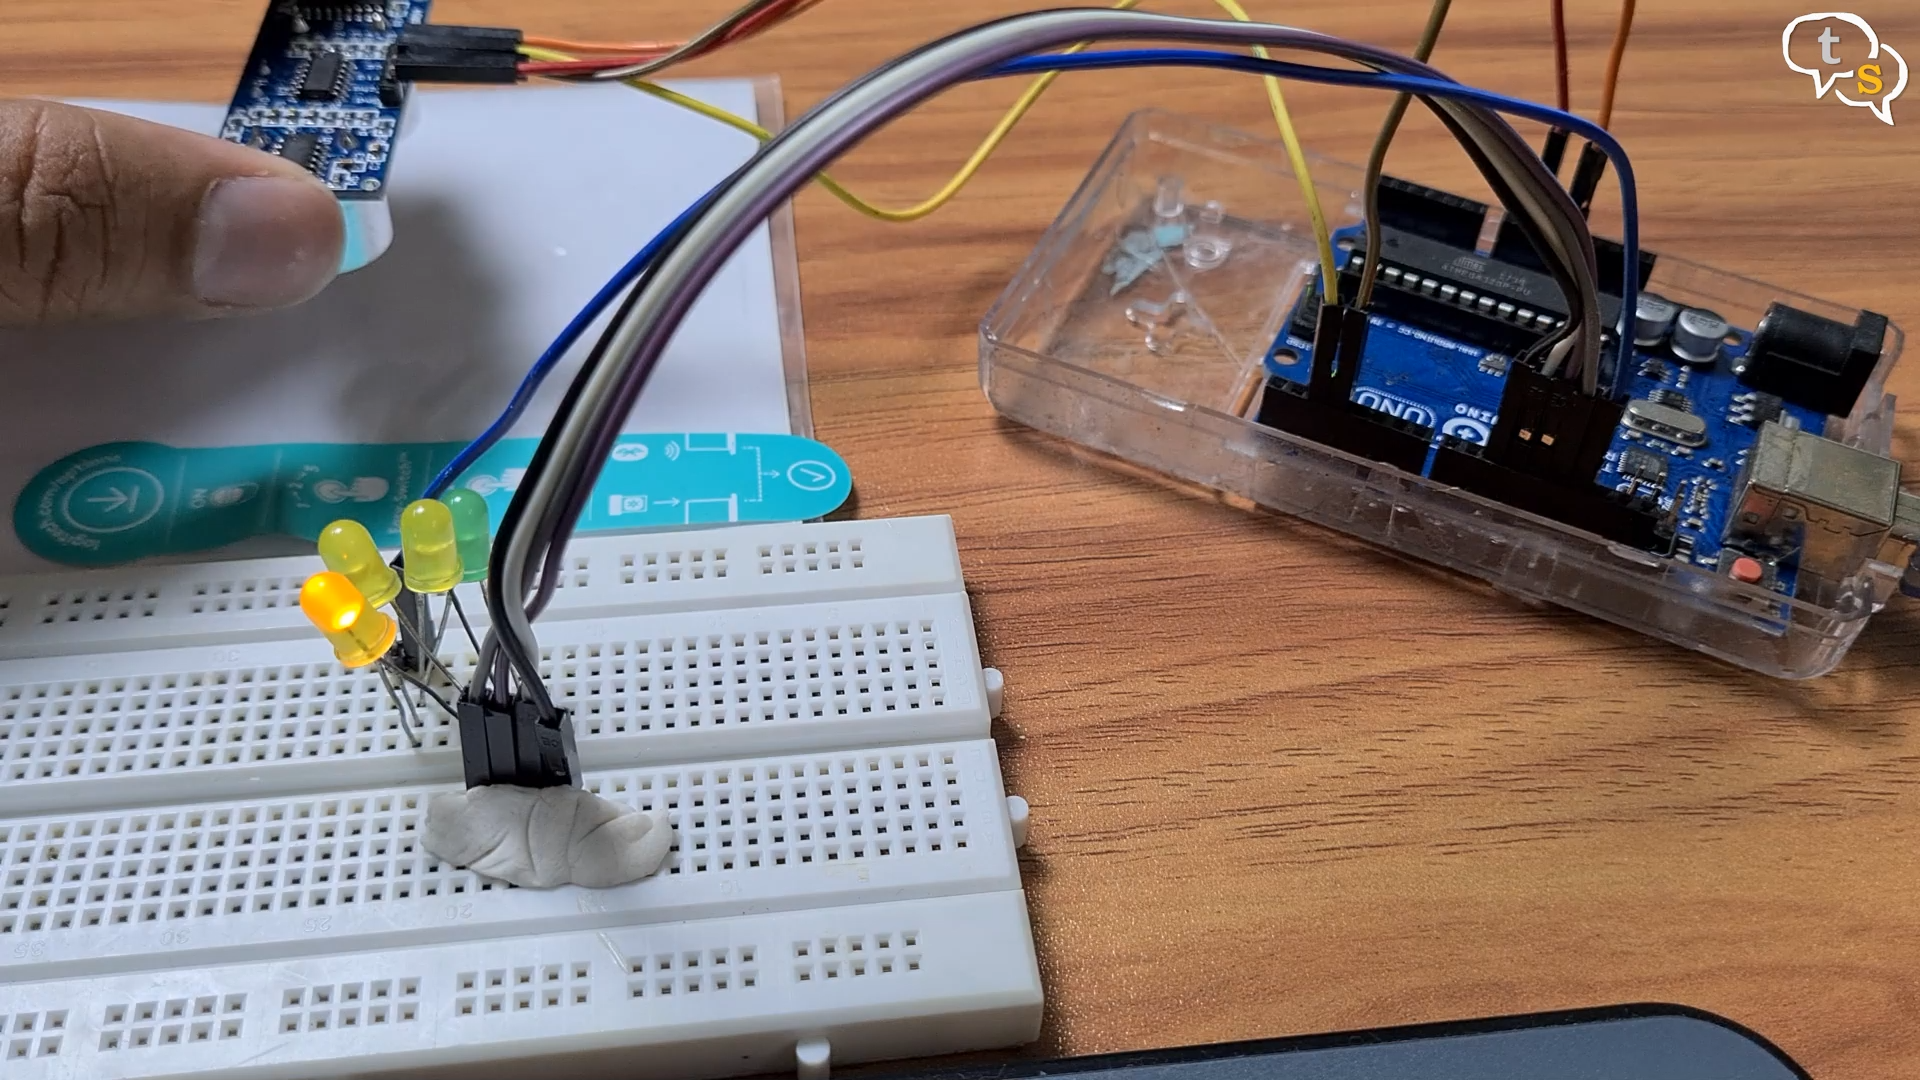 Testing if the Ultrasonic sensor is changing values